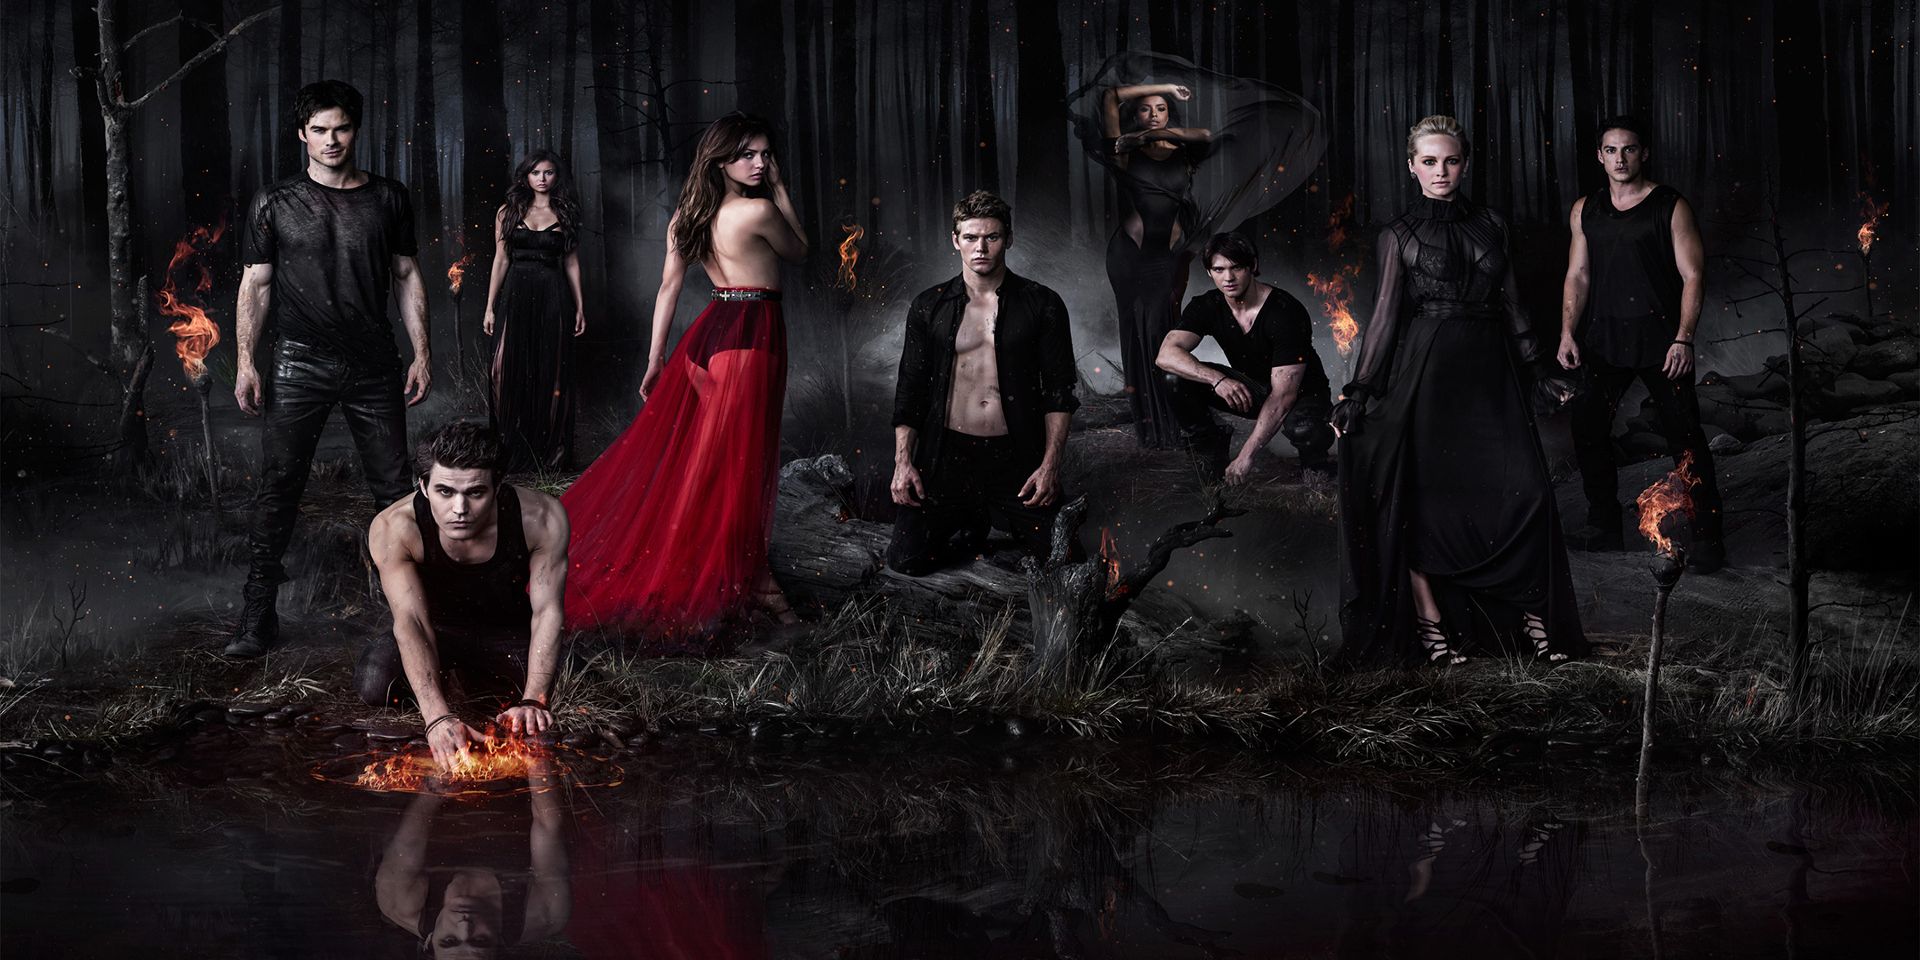 Cast of characters from the CW drama series The Vampire Diaries.